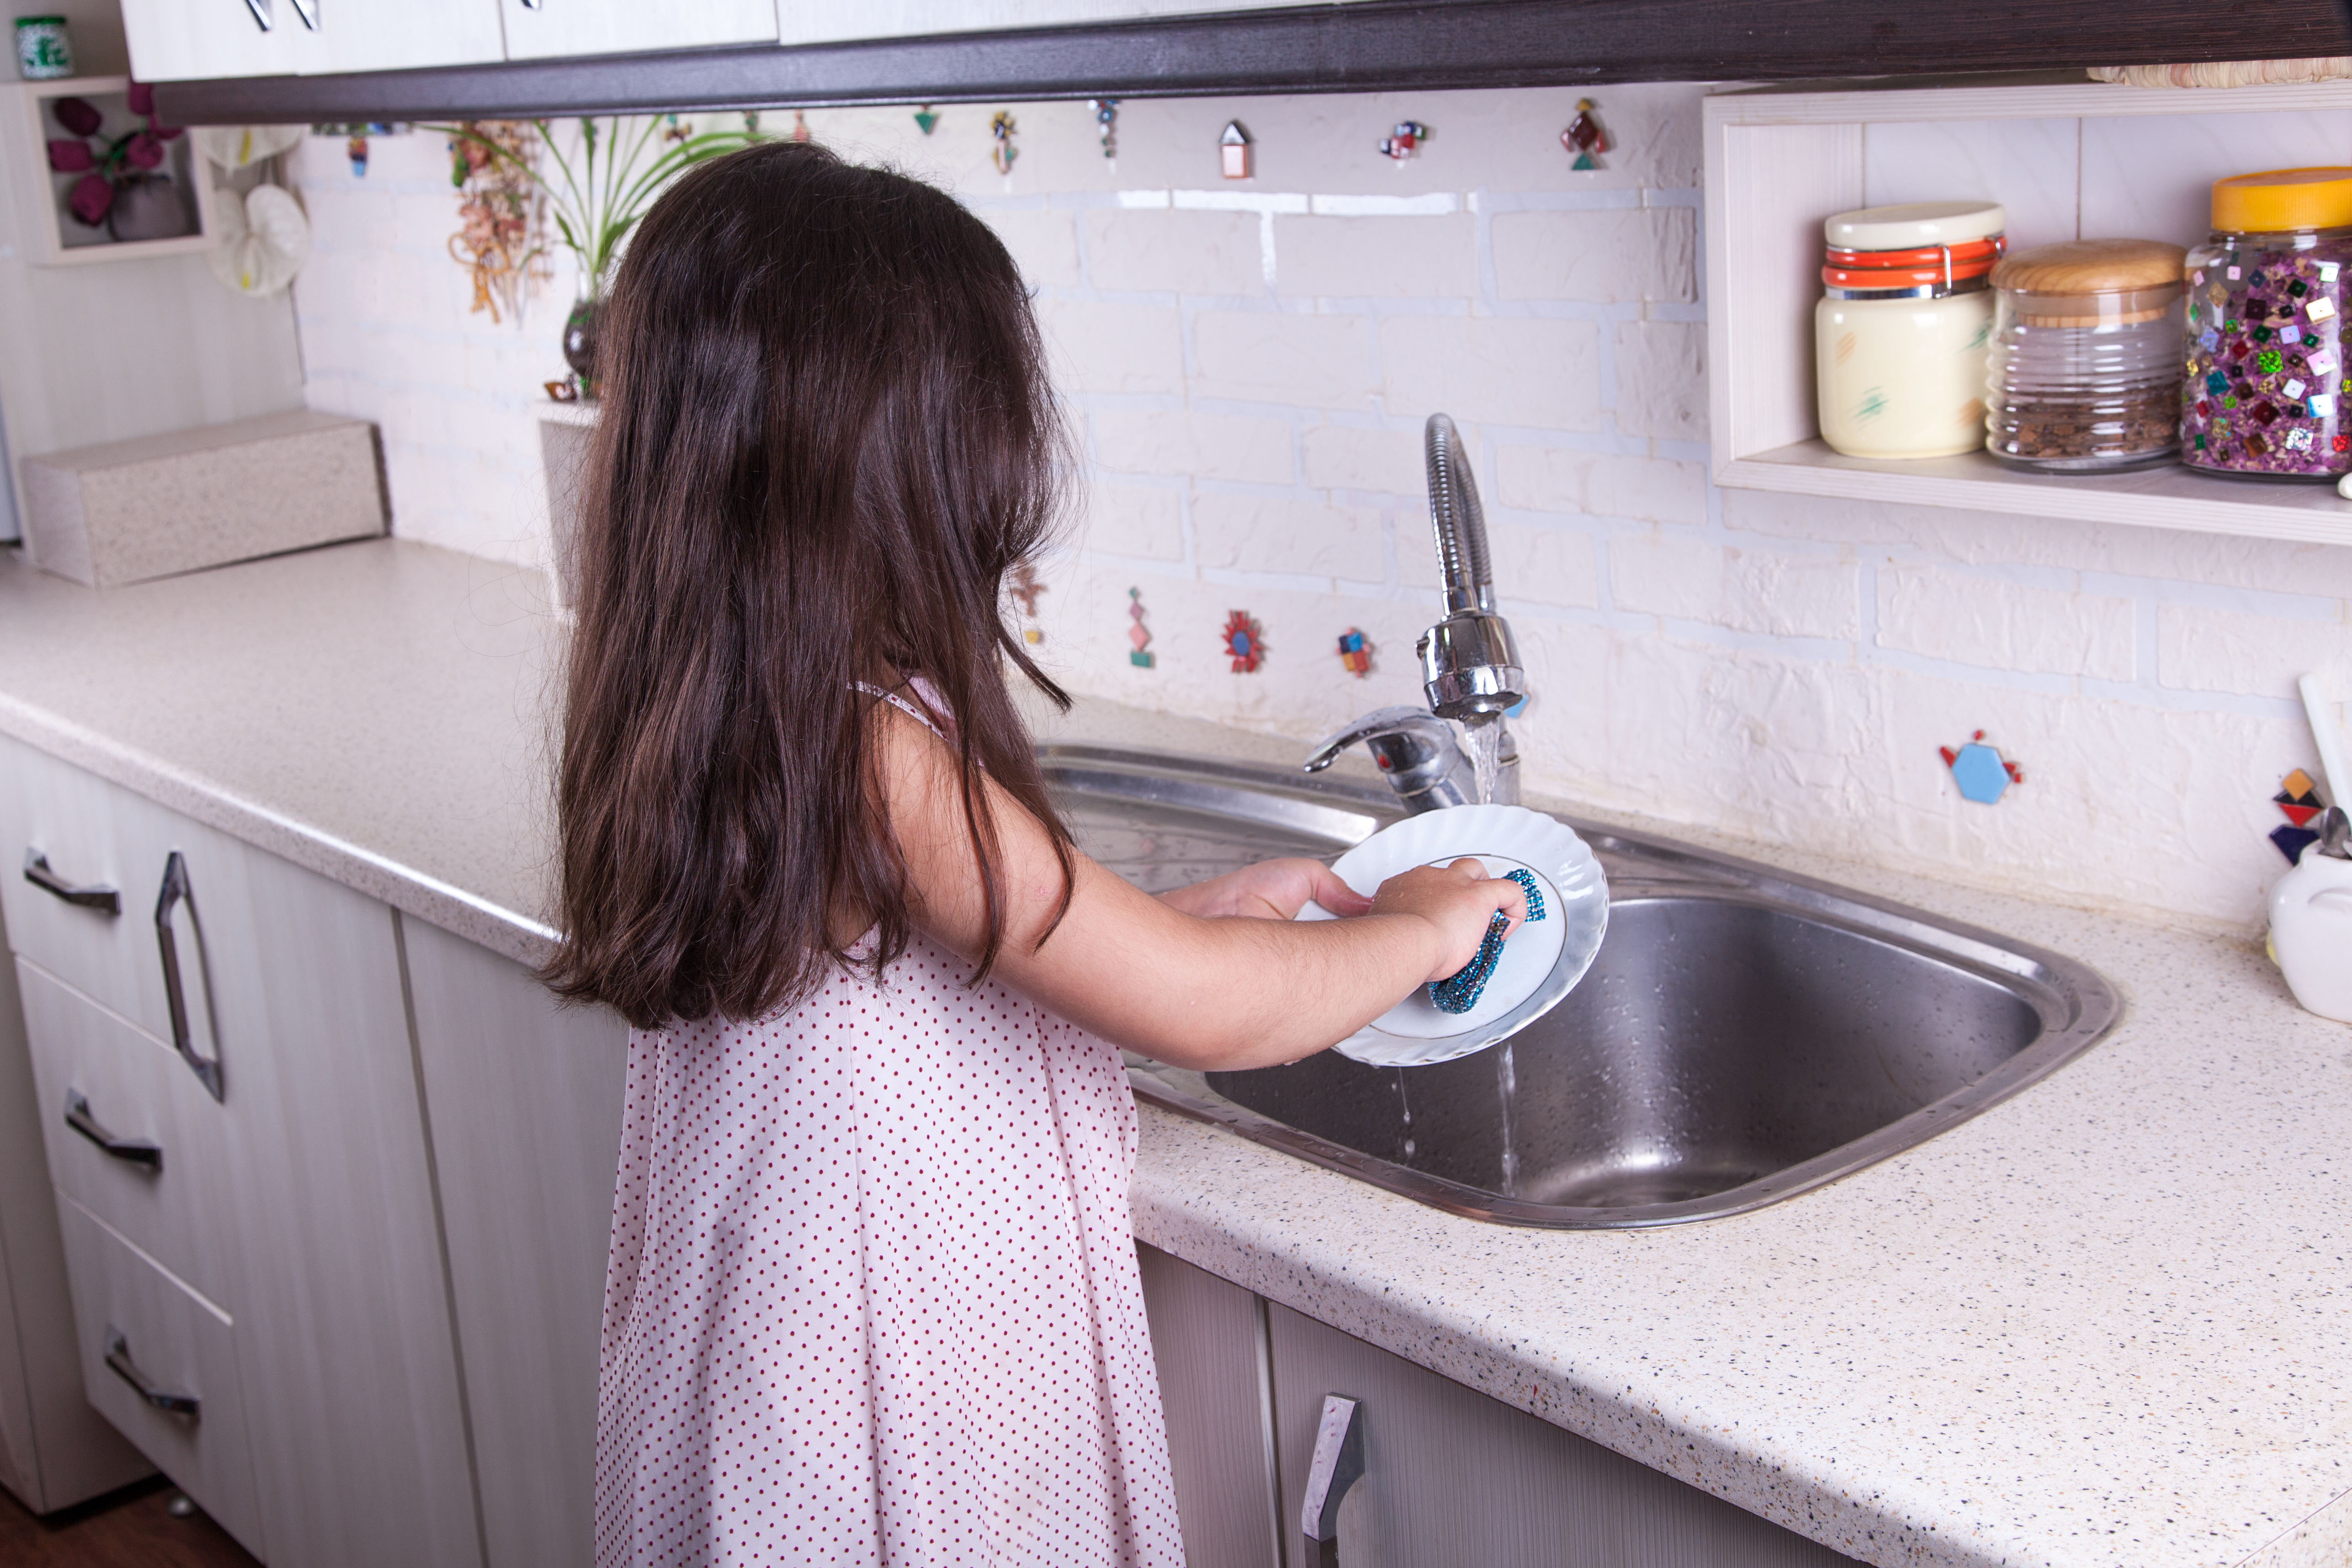 This chart shows what kitchen chores kids can do based on their age